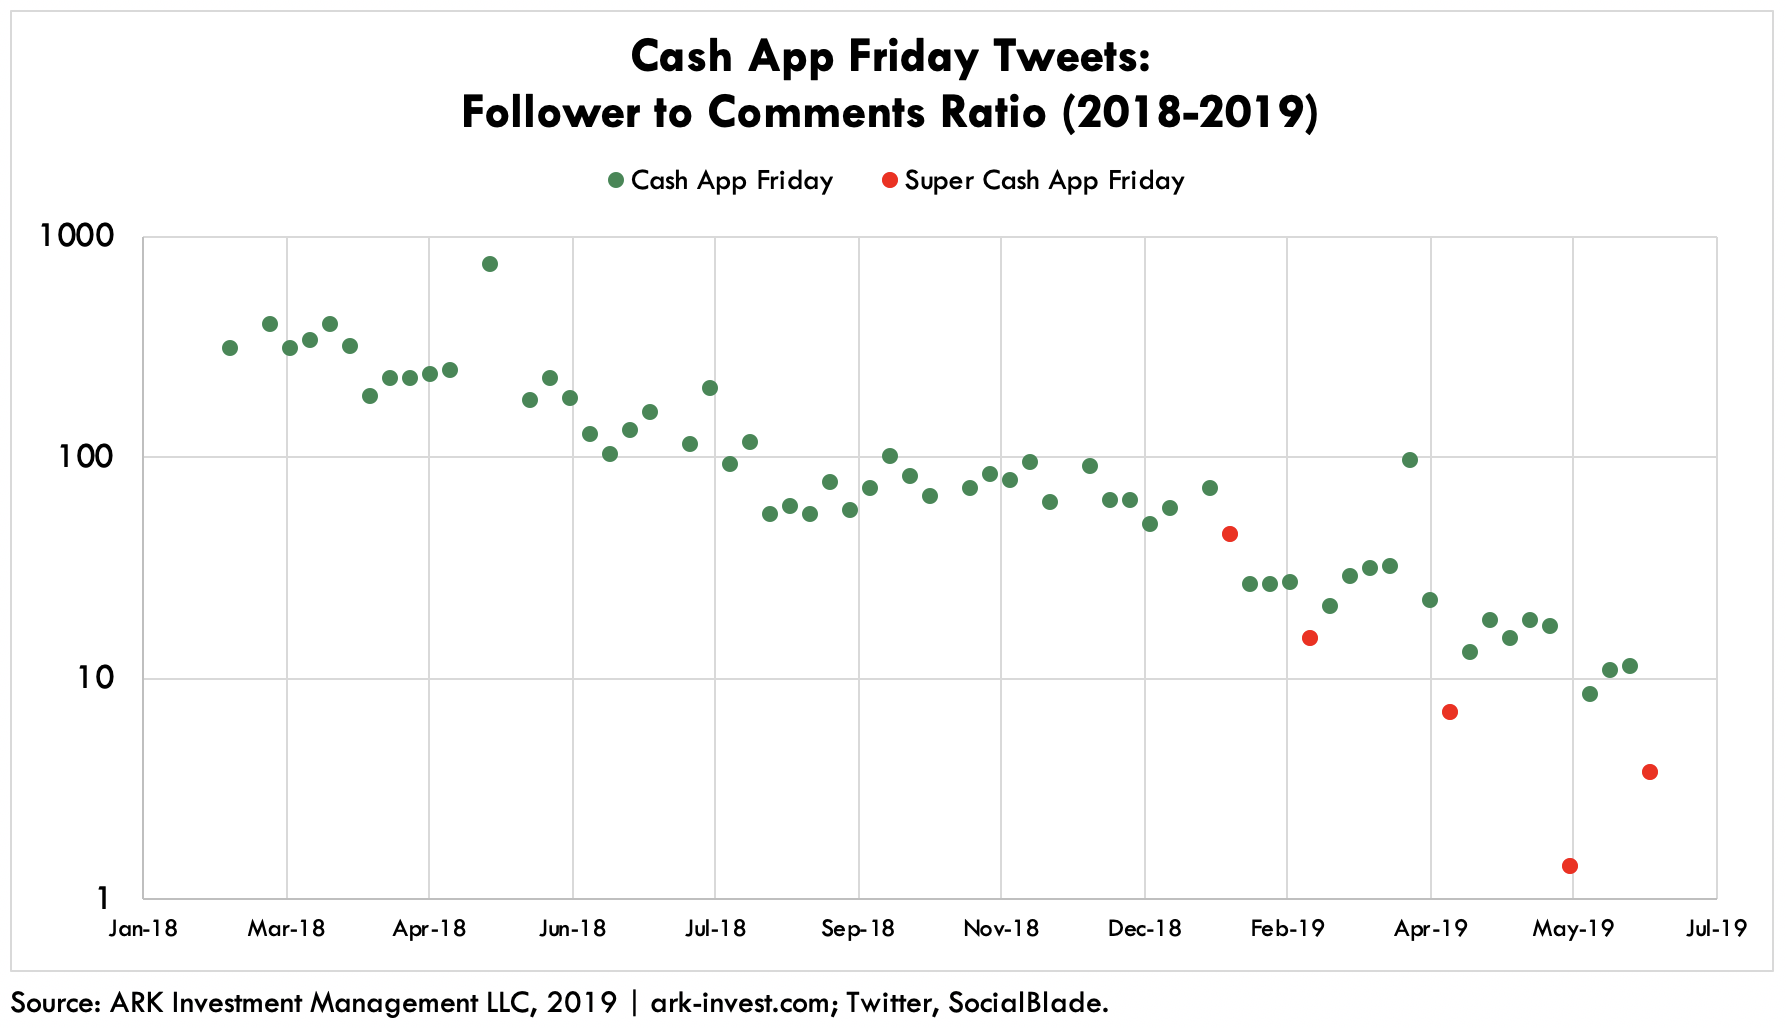 Cash App Twitter Friday Tweets Follower to Comments Ratio